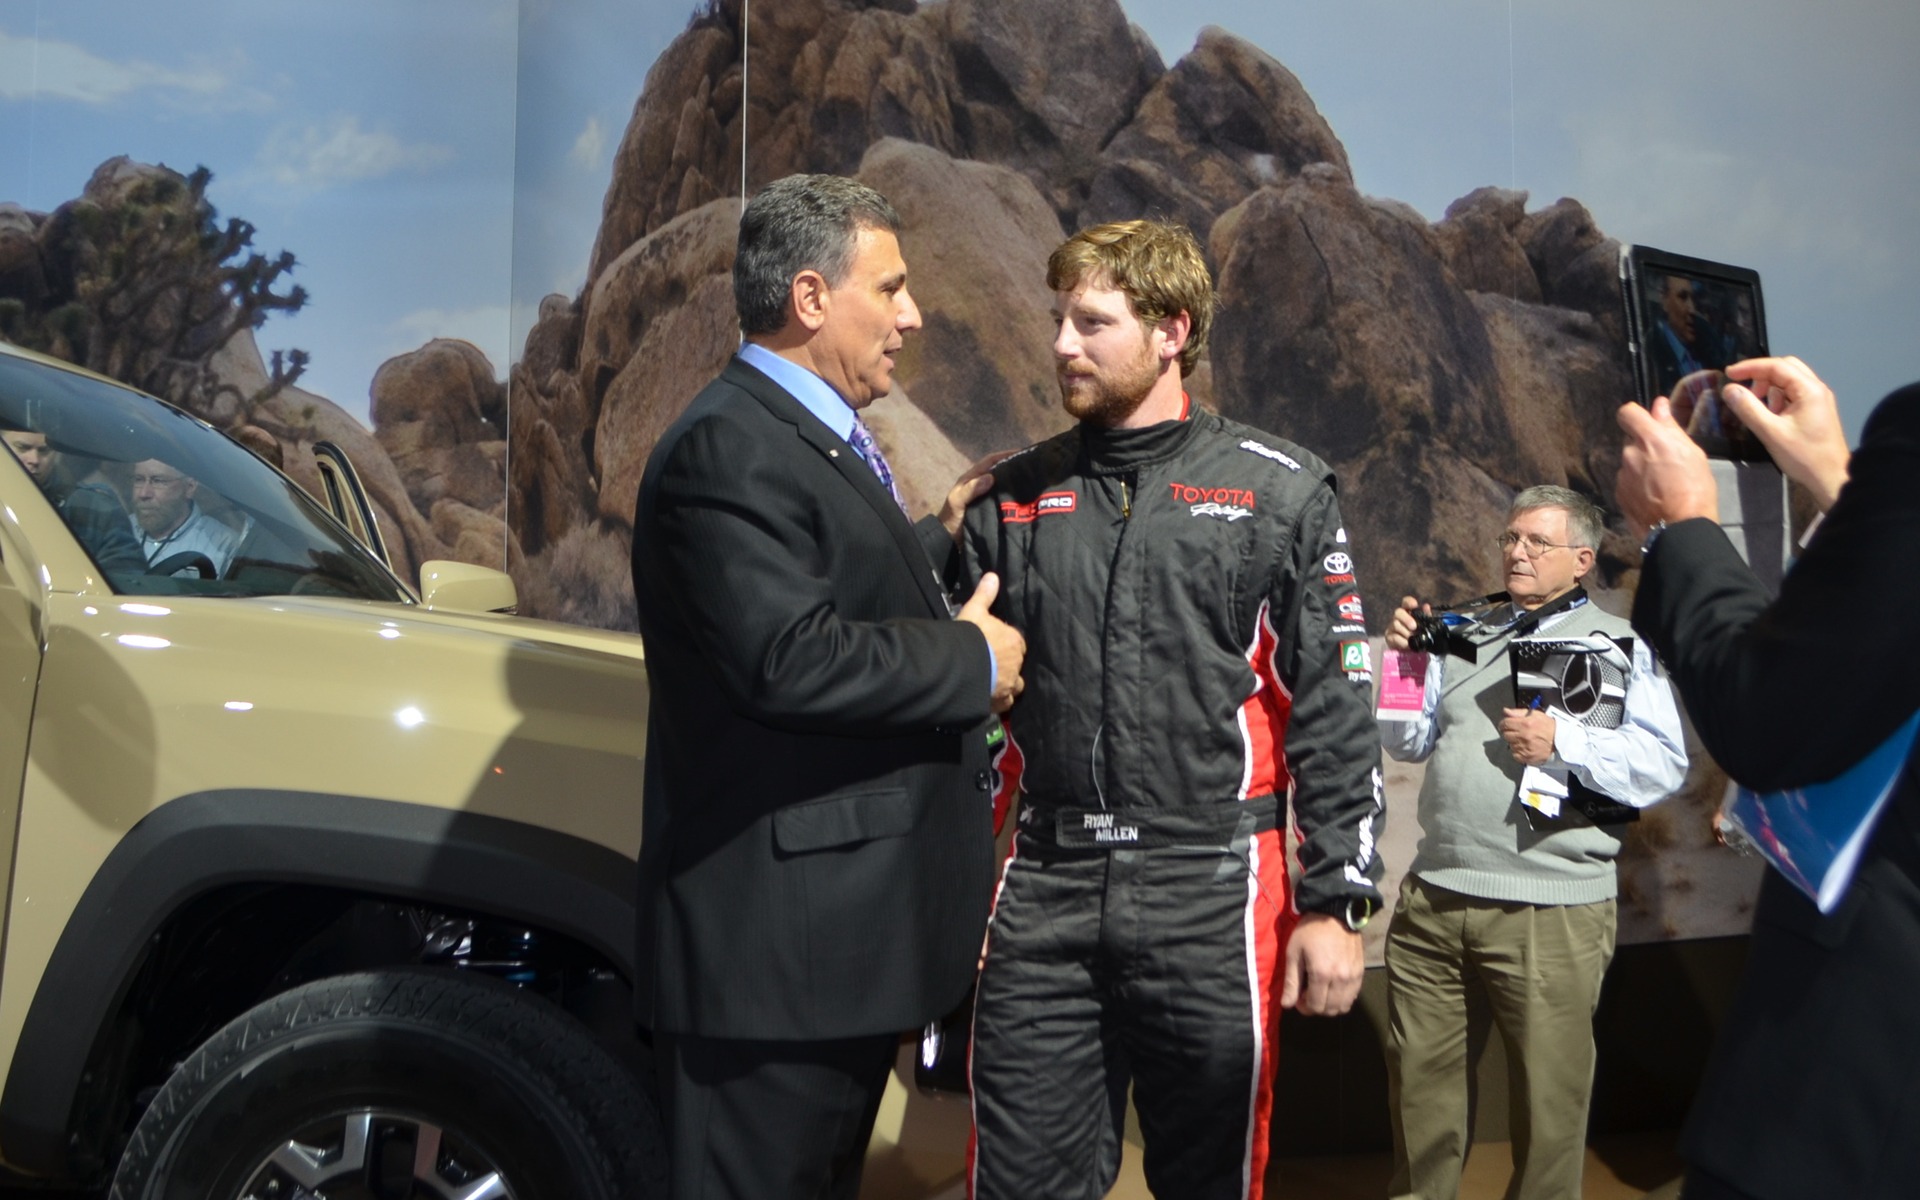 Ryan Millen presents the Tacoma TRD Off-Road.